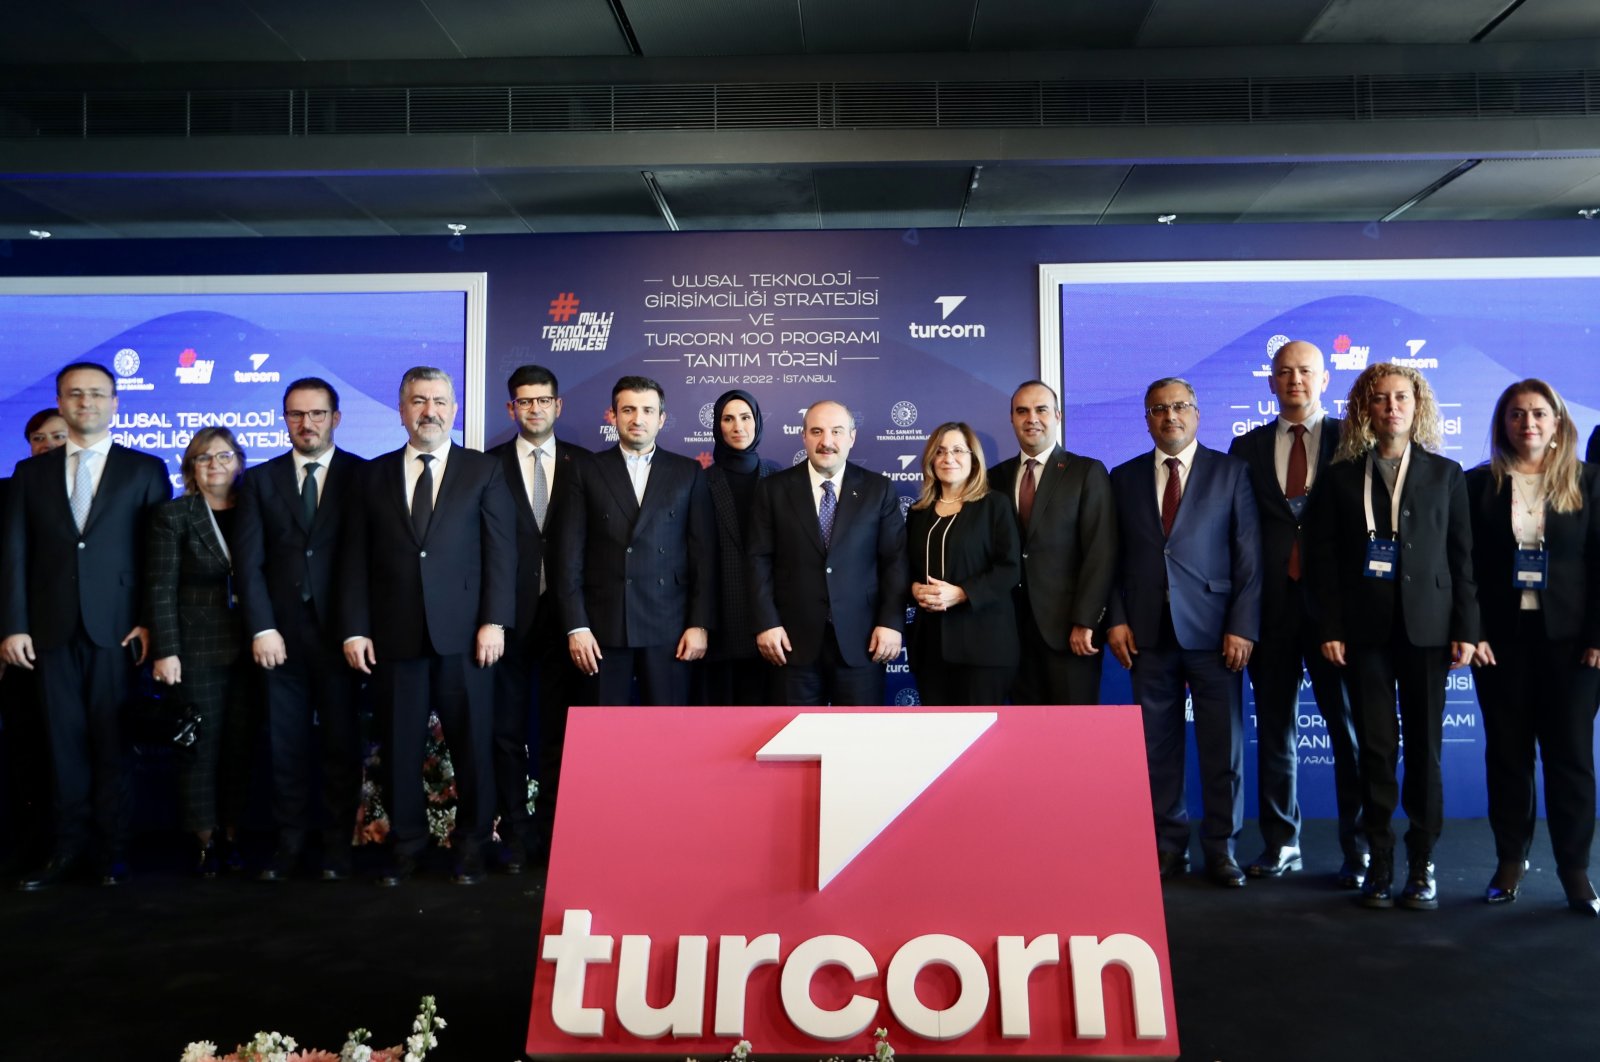 Industry and Technology Minister Mustafa Varank (C), Baykar Chief Technology Officer (CTO) Selçuk Bayraktar (6th from L) and other officials pose for a photo during the event to unveil National Technology Entrepreneurship Strategy and Turcorn 100 Program, in Istanbul, Türkiye, Dec. 21, 2022. (AA Photo)